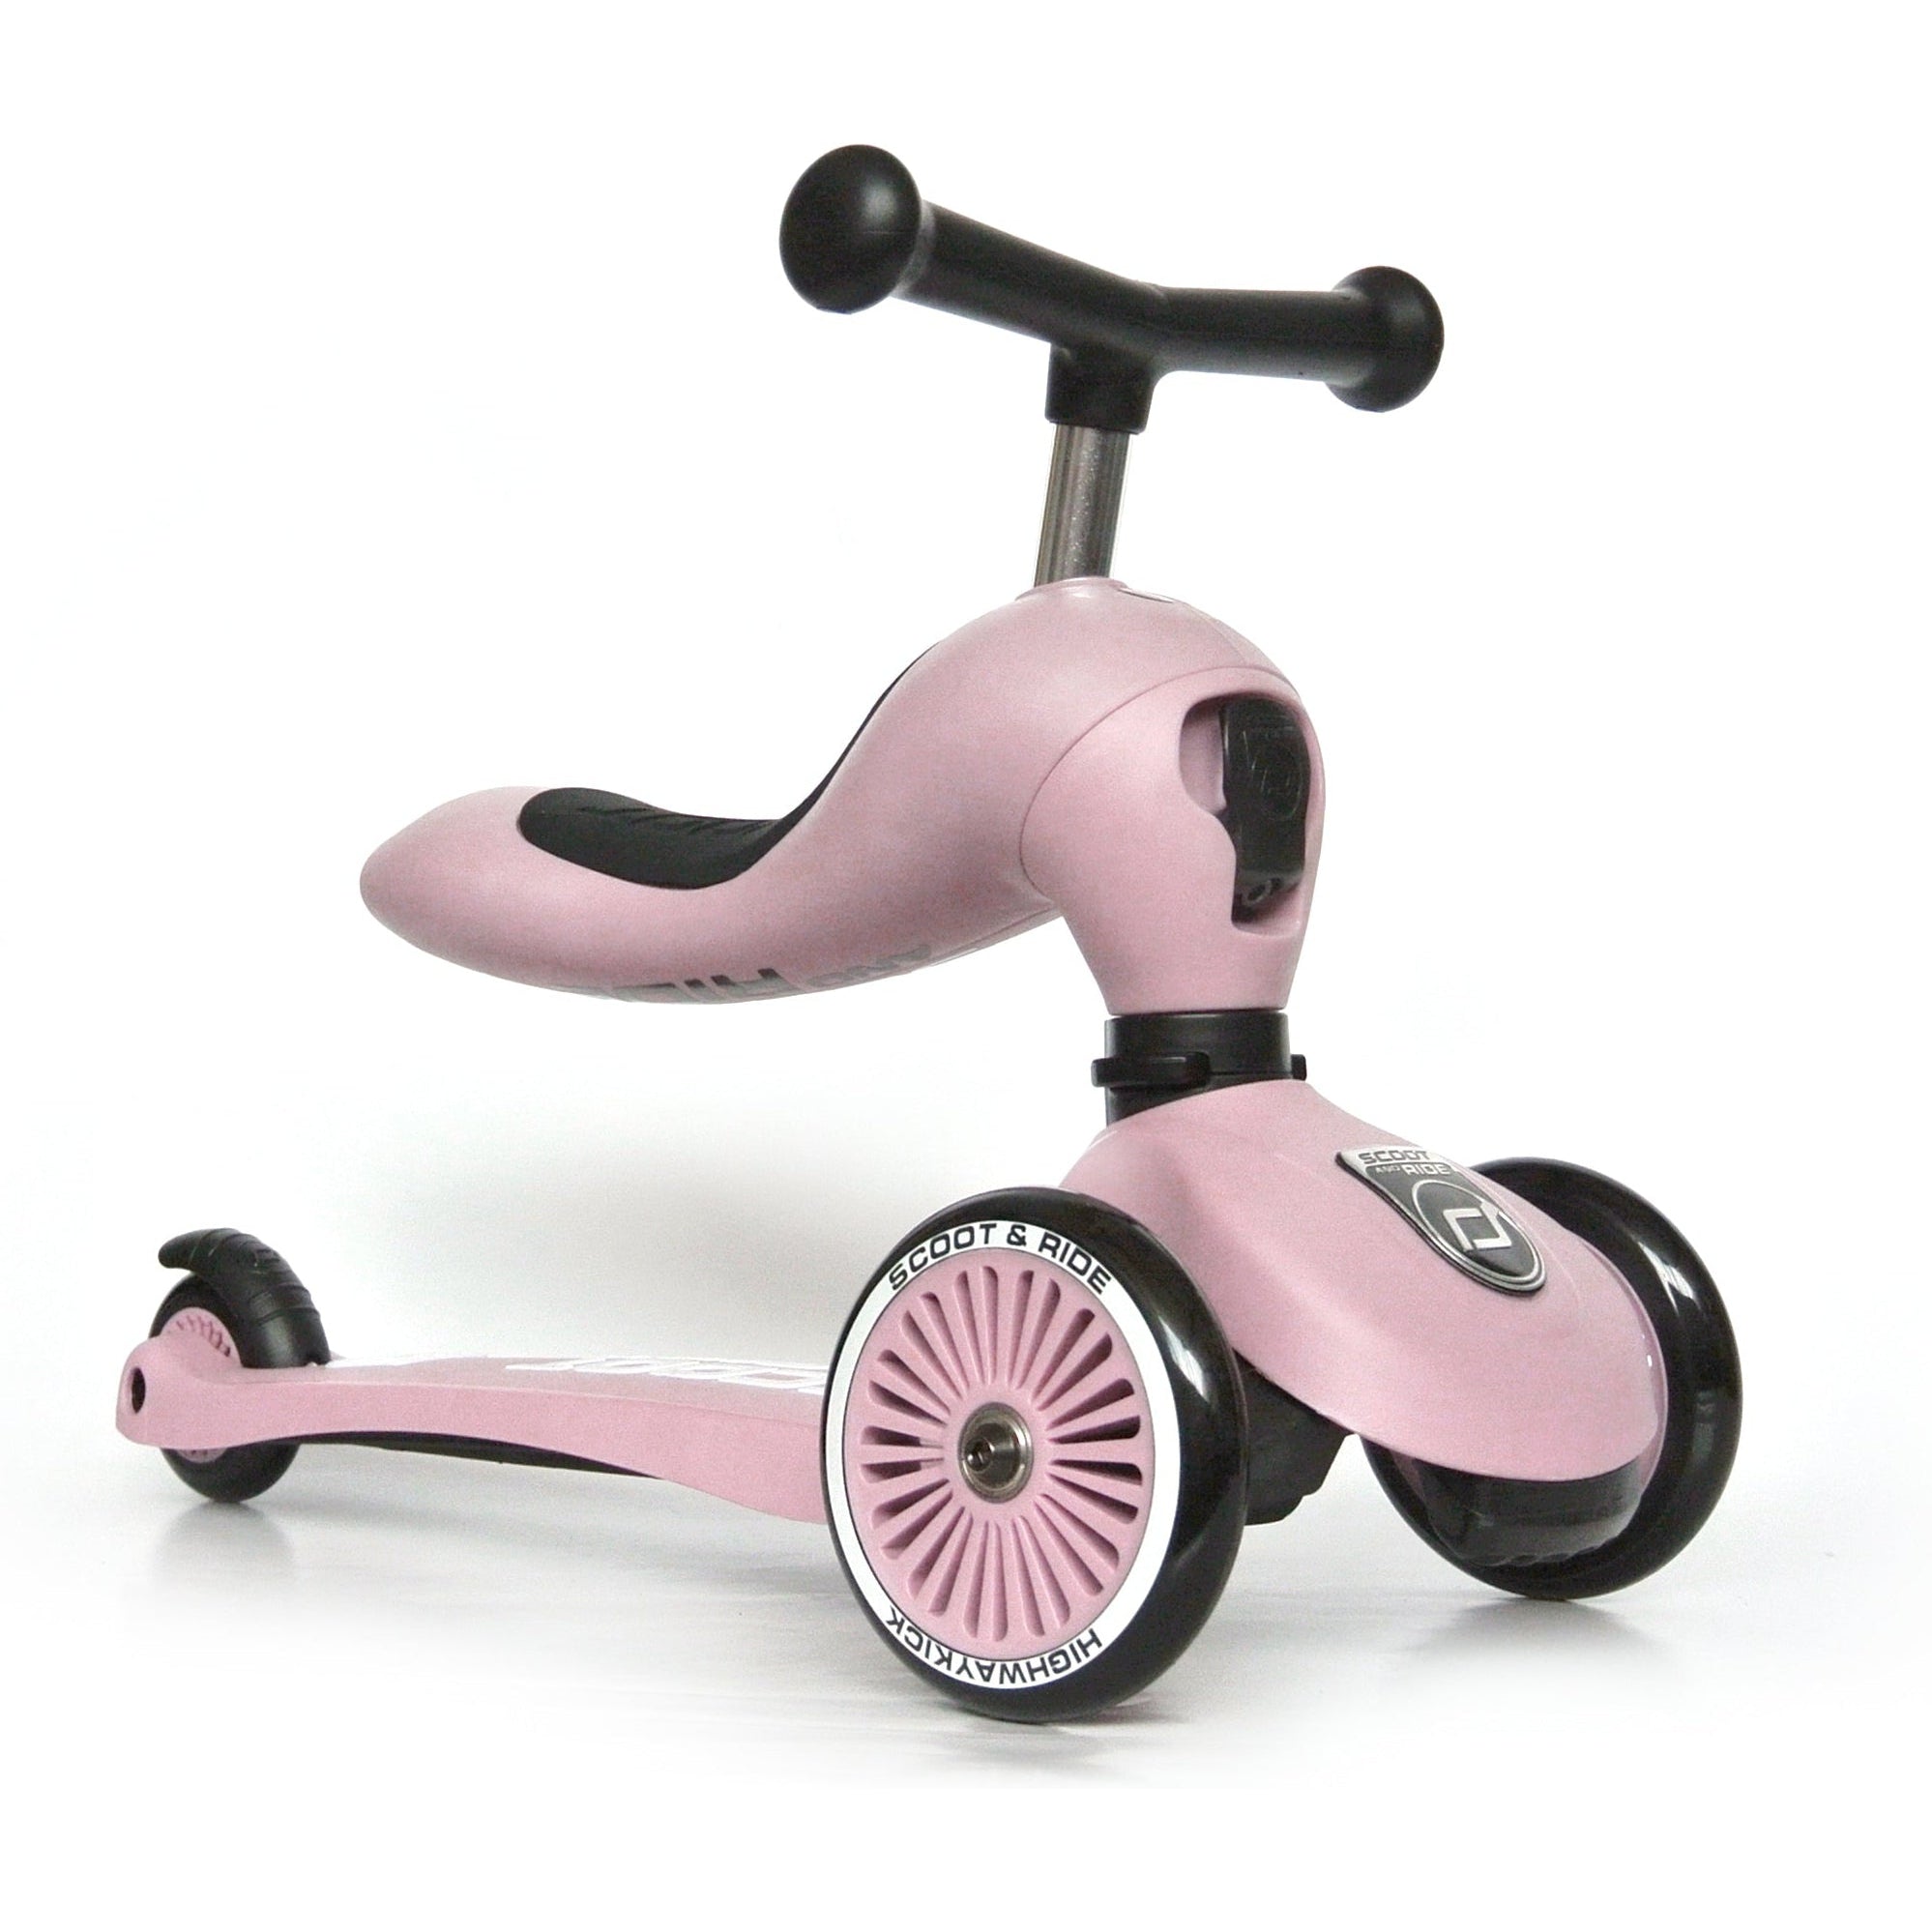 Scoot and Ride Highway Kick 1 - 3 Wheel Seated or Standing Scooter for Toddlers Scooters